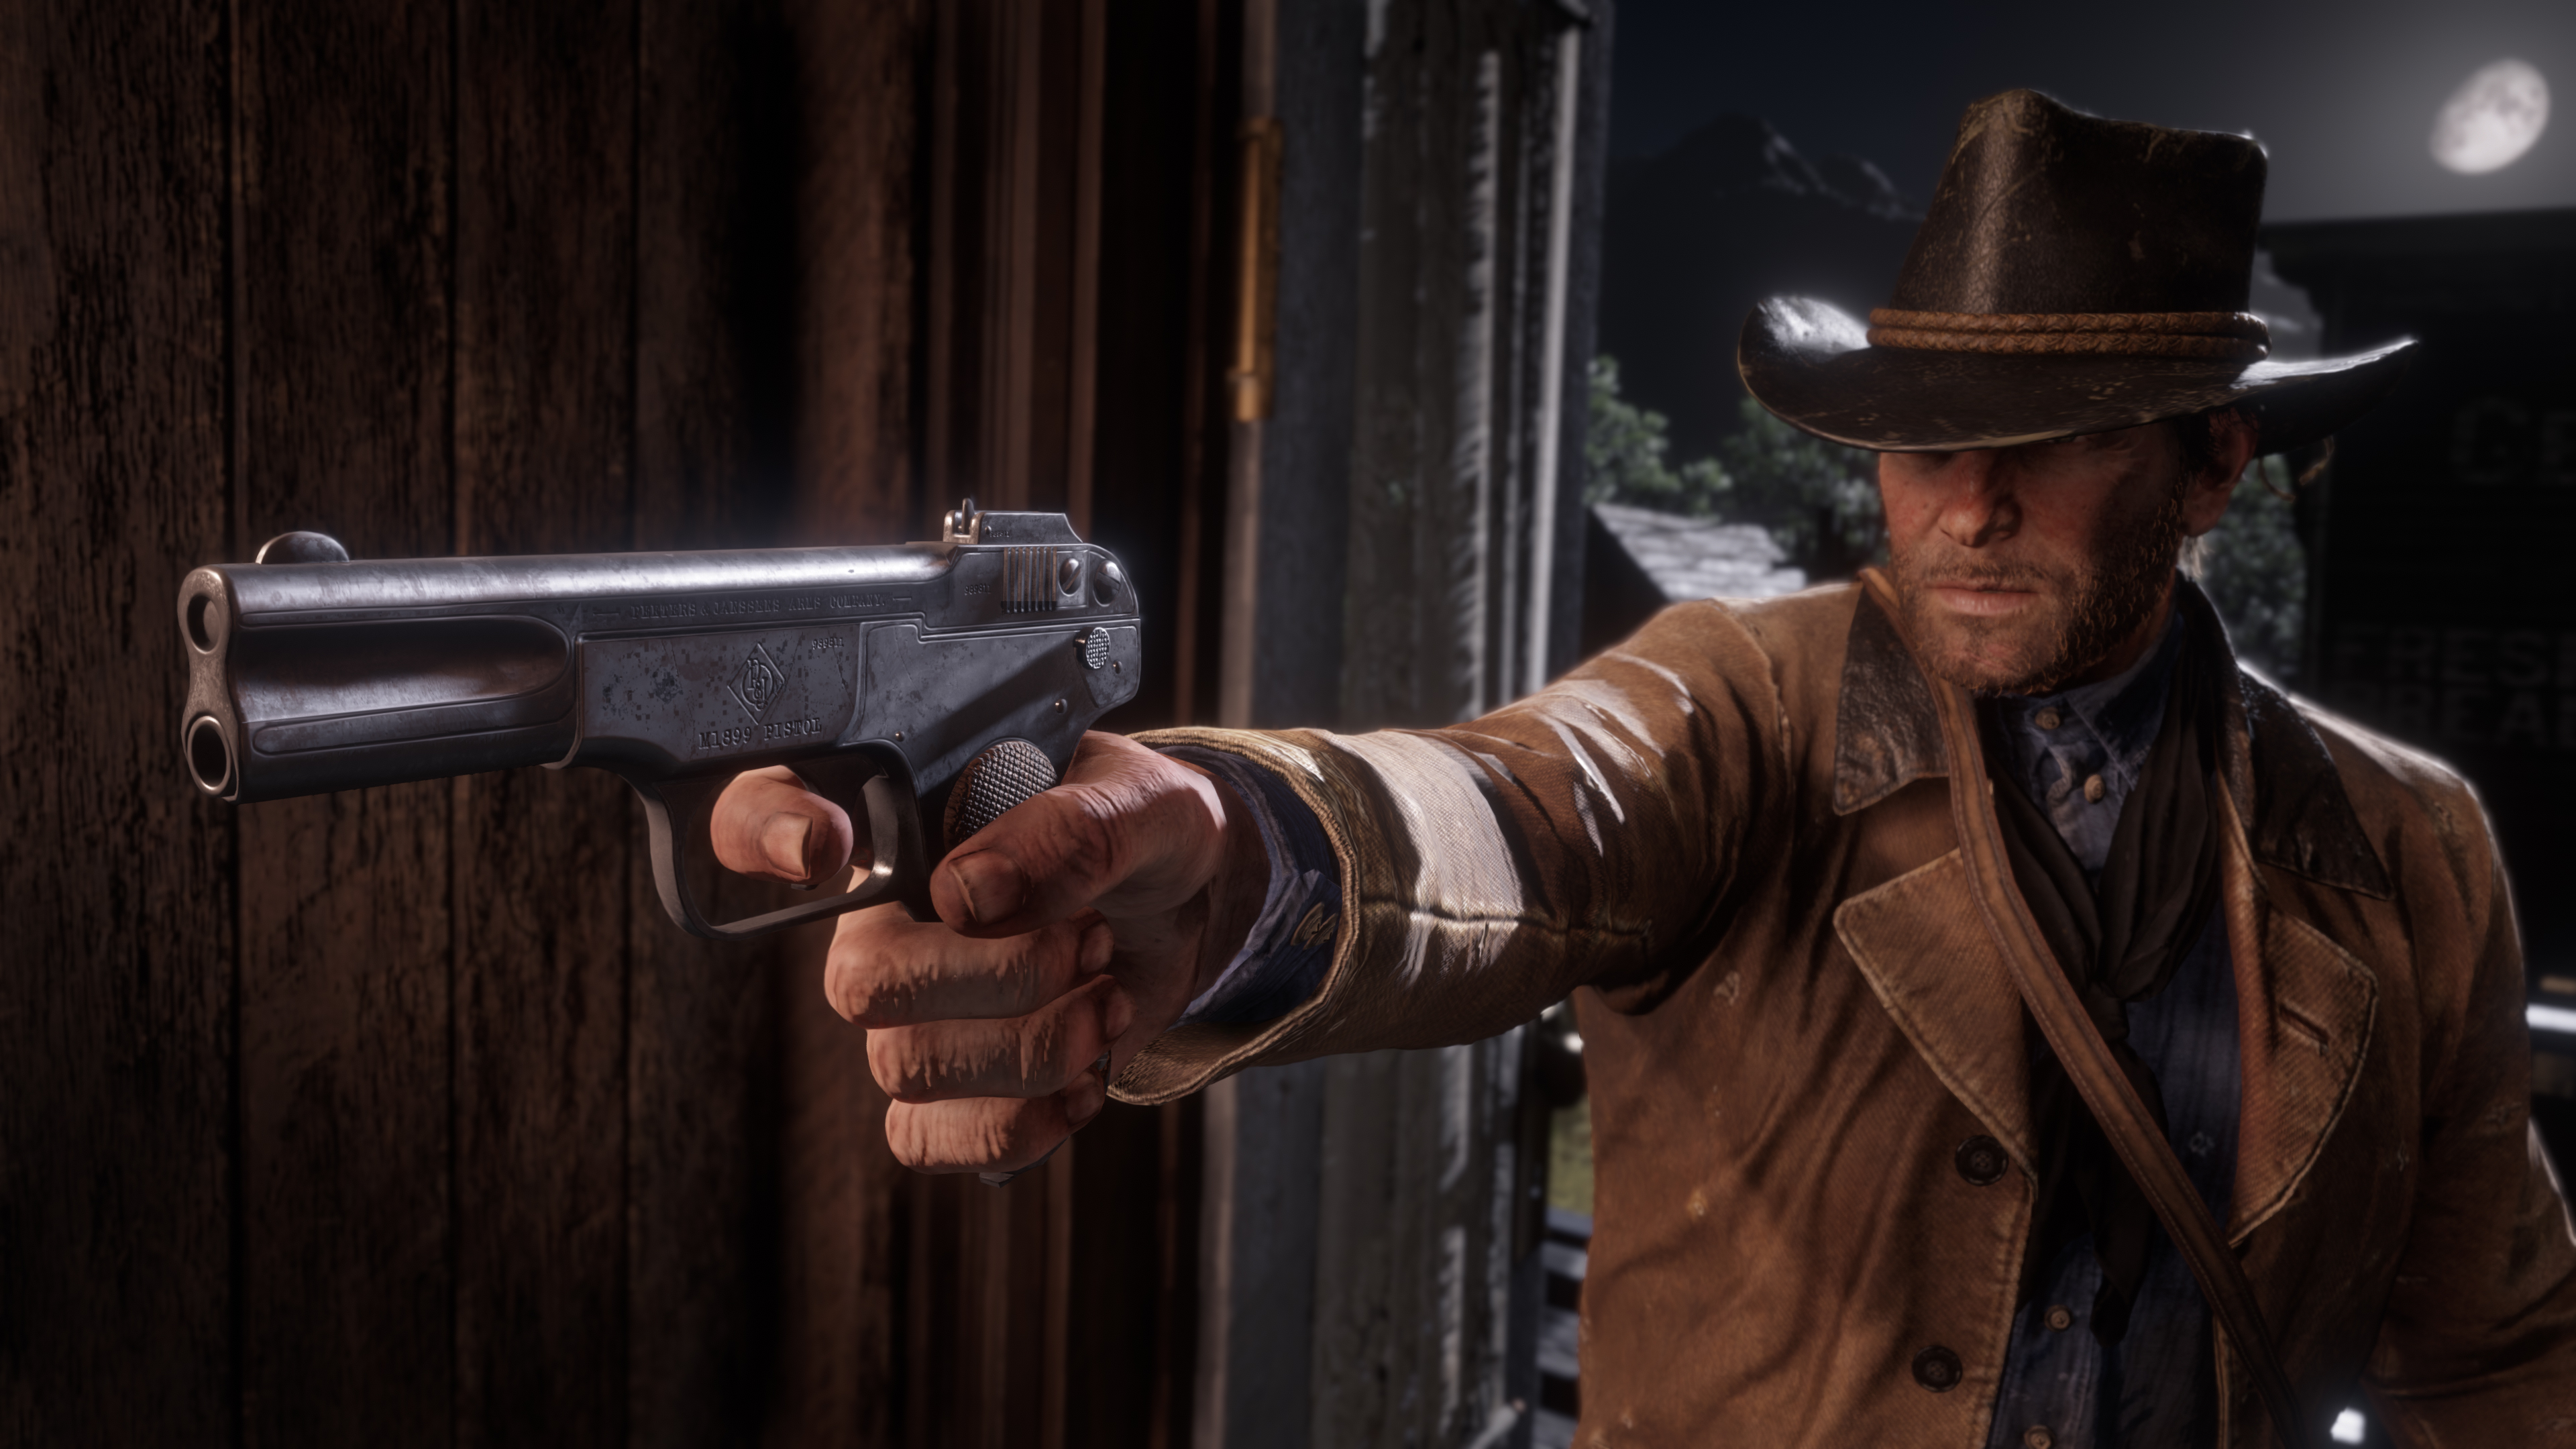 Red Dead Redemption 2 PC Exclusive Weapons, Missions & Horses Detailed ab17eba1edb65d701e0c5fa5ef0ec1297aa90d4c